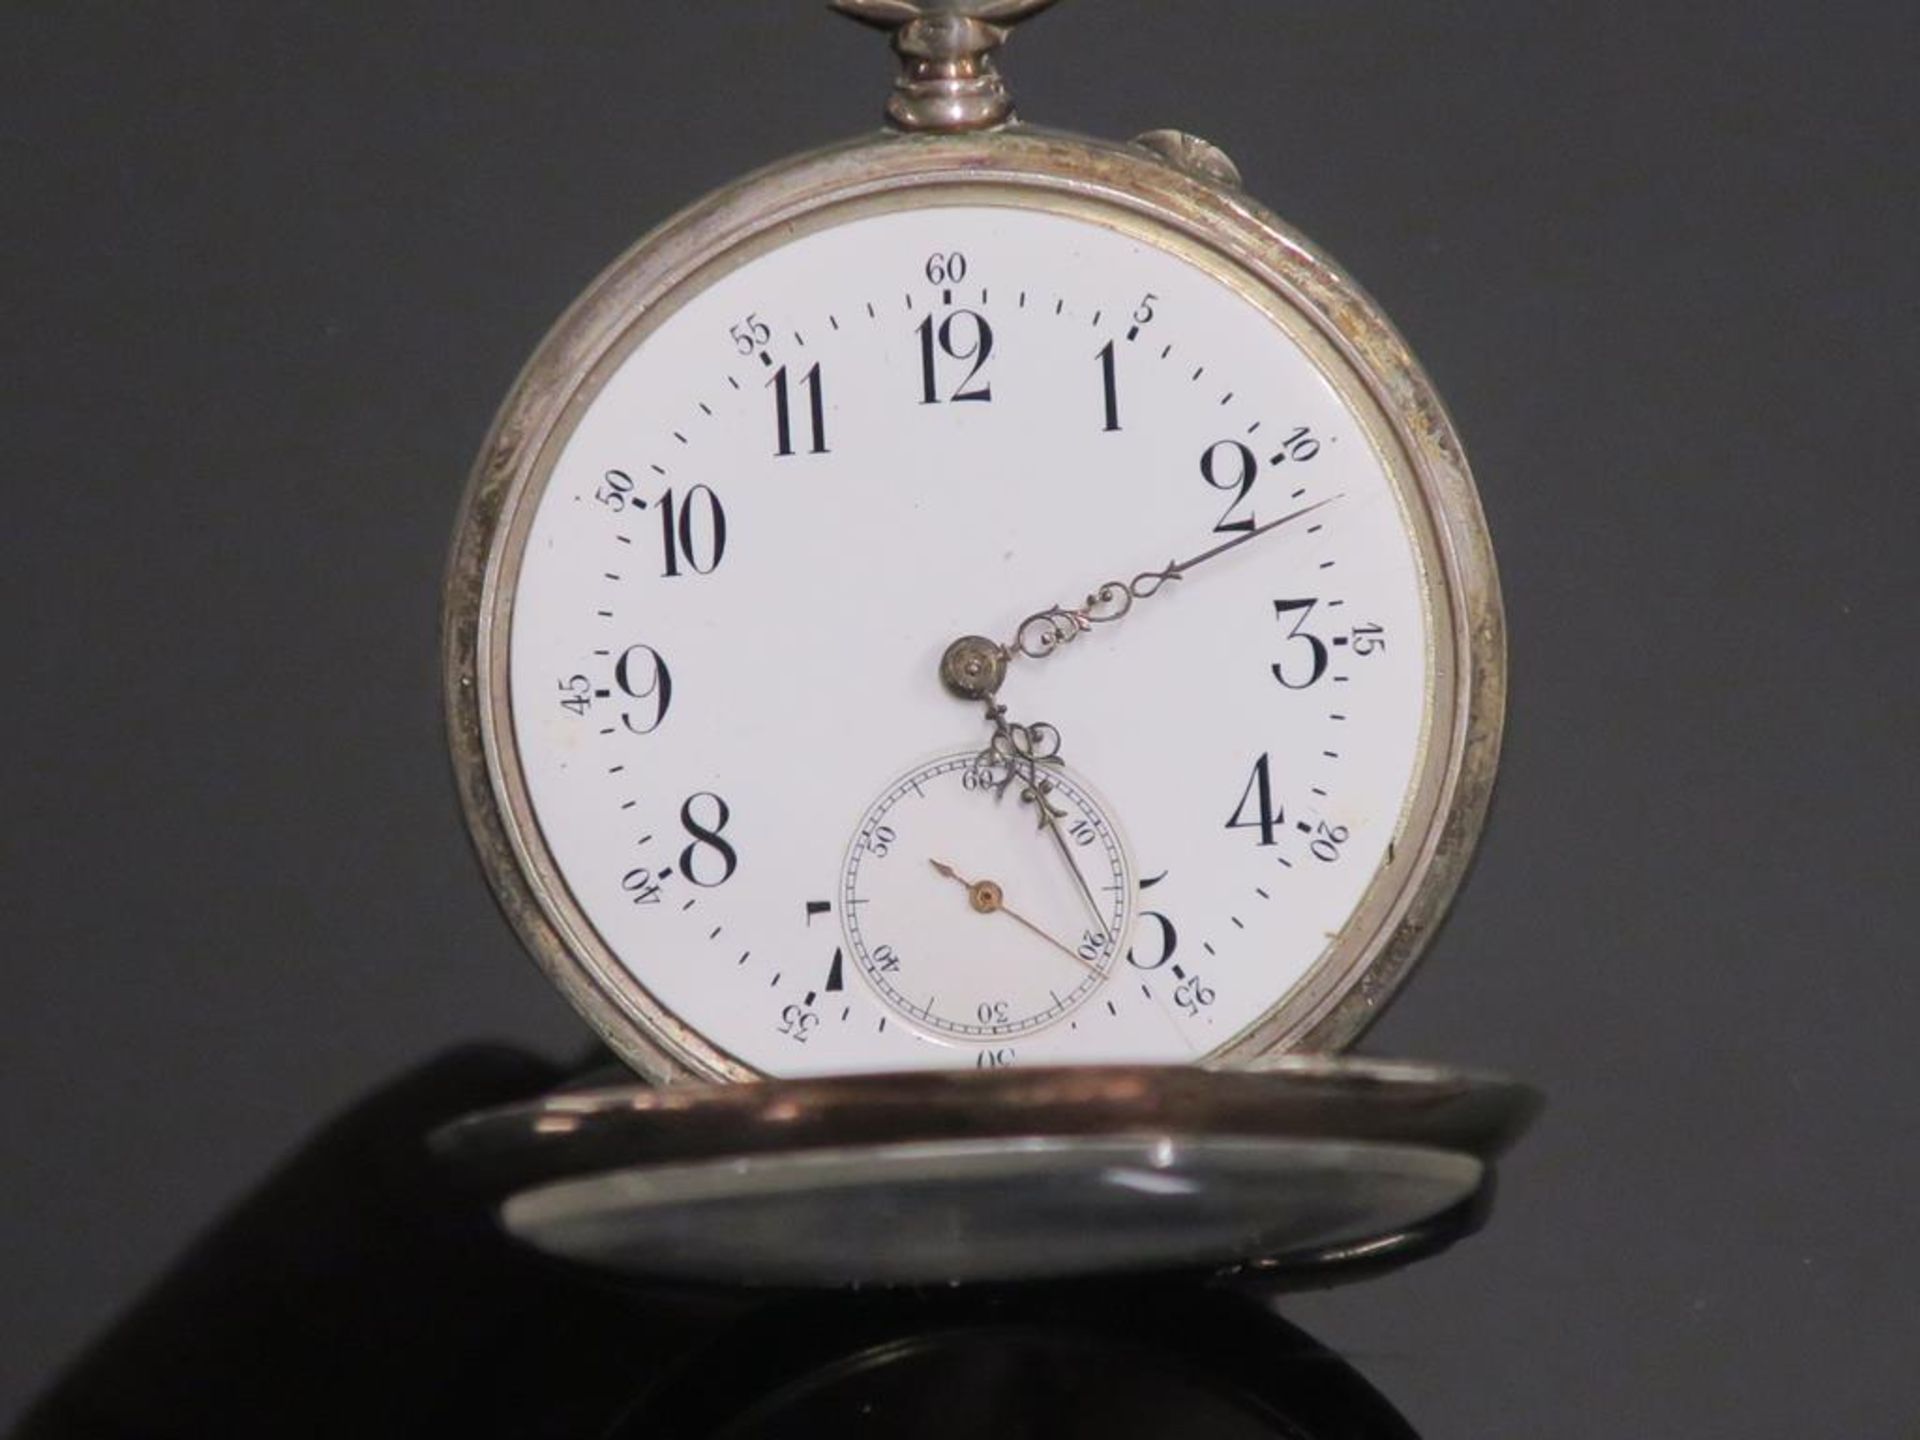 A Fine Silver Pocket Watch Hallmarked with 0.800, 1327426, a Grouse, a German Crescent Moon and - Image 2 of 7